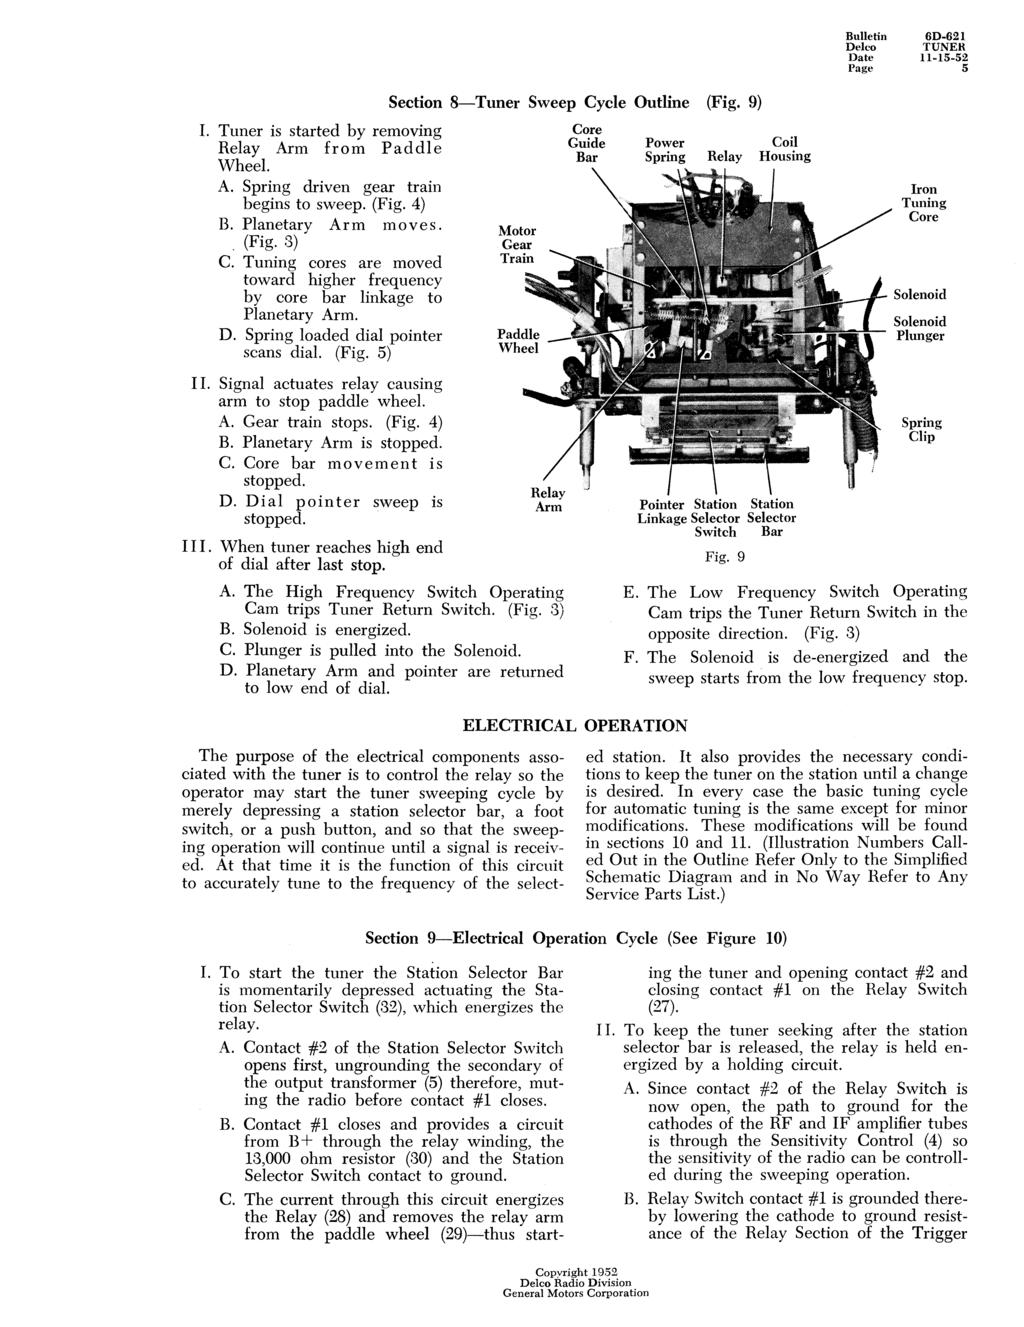 Bulletin 6D -621 Deleo TUNER Date 1 1-1 5-5 2 Page 5 I. Tuner is started by removing Relay Arm from Paddle Wheel. A. Spring driven gear train begins to sweep. (Fig. 4) B. Planetary Arm moves.. (Fig. 3) C.